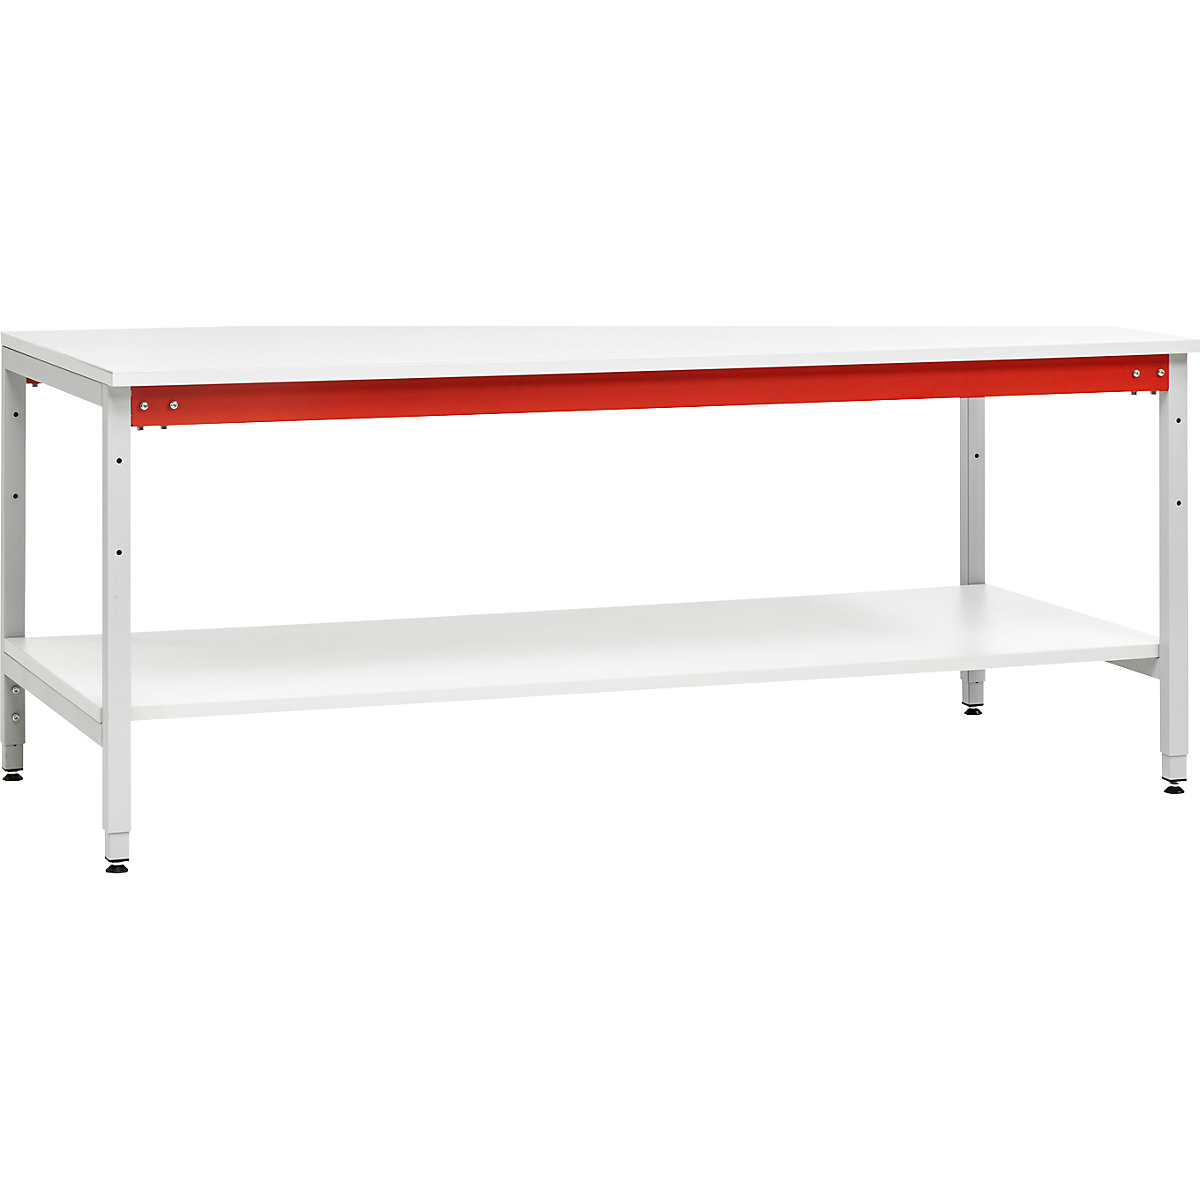 Packing table, standard, HxWxD 780 x 2000 x 900 mm-10